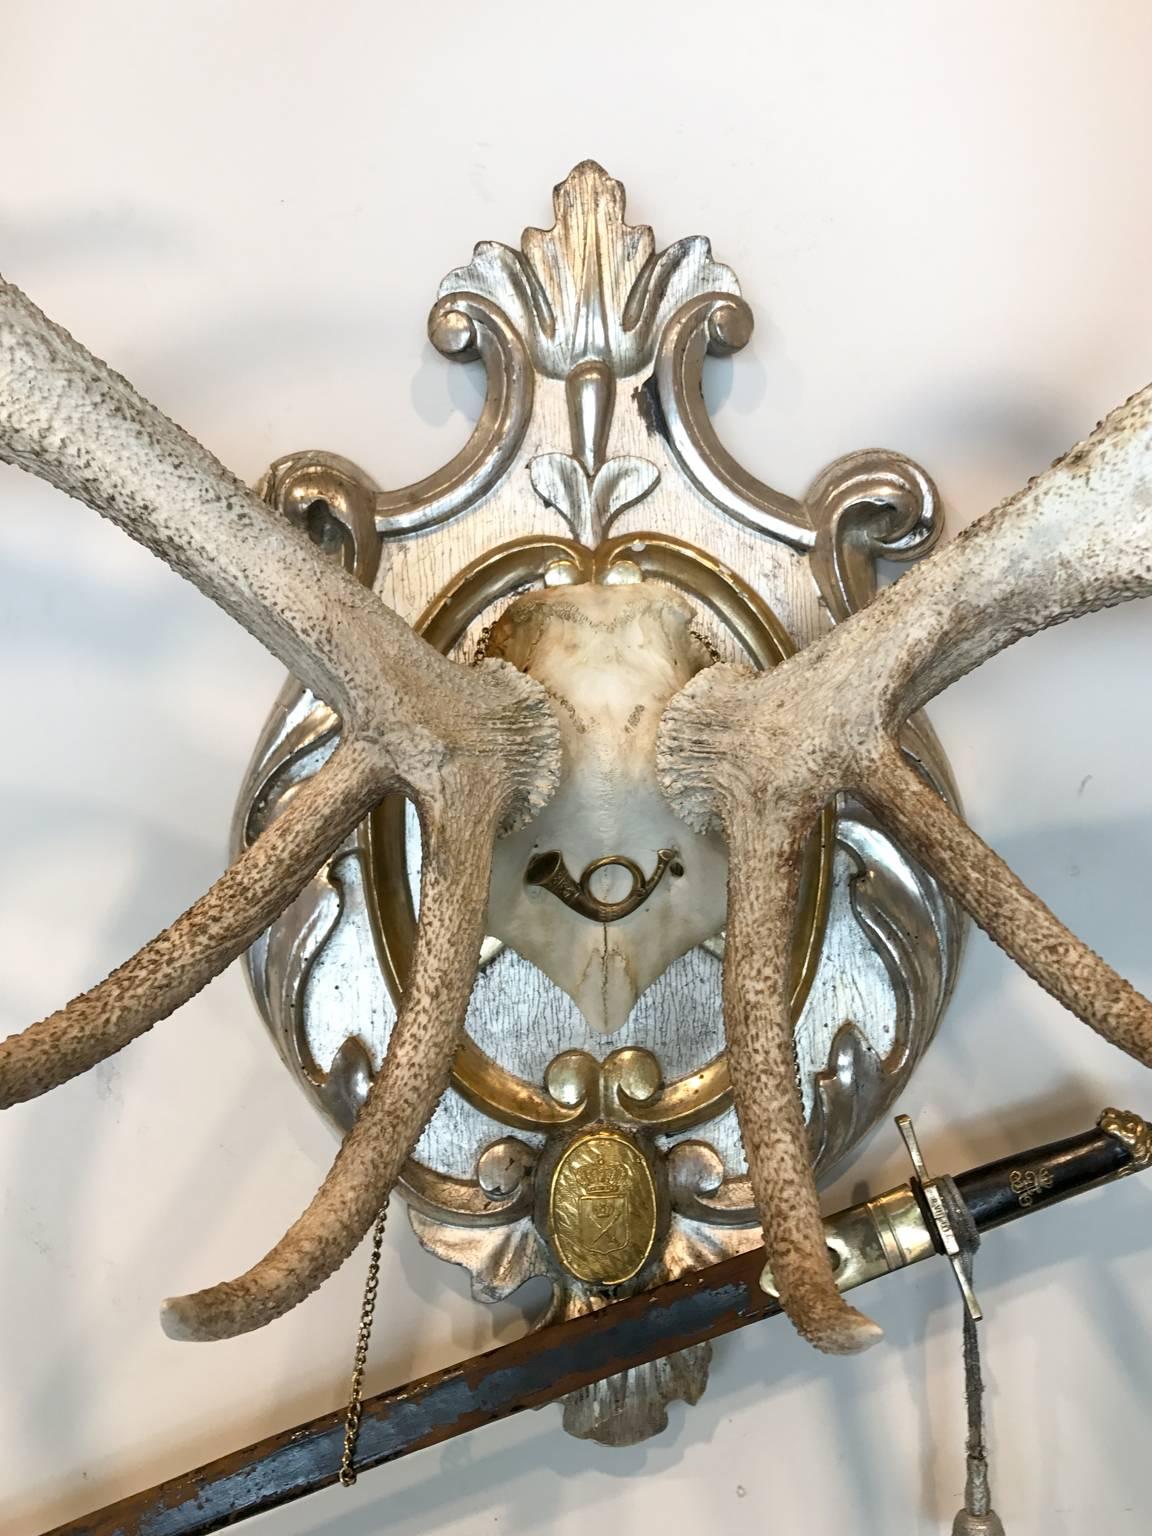 An exquisite 19th century Red Stag hunting trophy believed to be taken by Frederick II, the Grand Duke of Baden, Germany.  Frederick Augustus II was also known as the Grand Duke of Oldenburg.  The mount sports his personal wappen and his personal